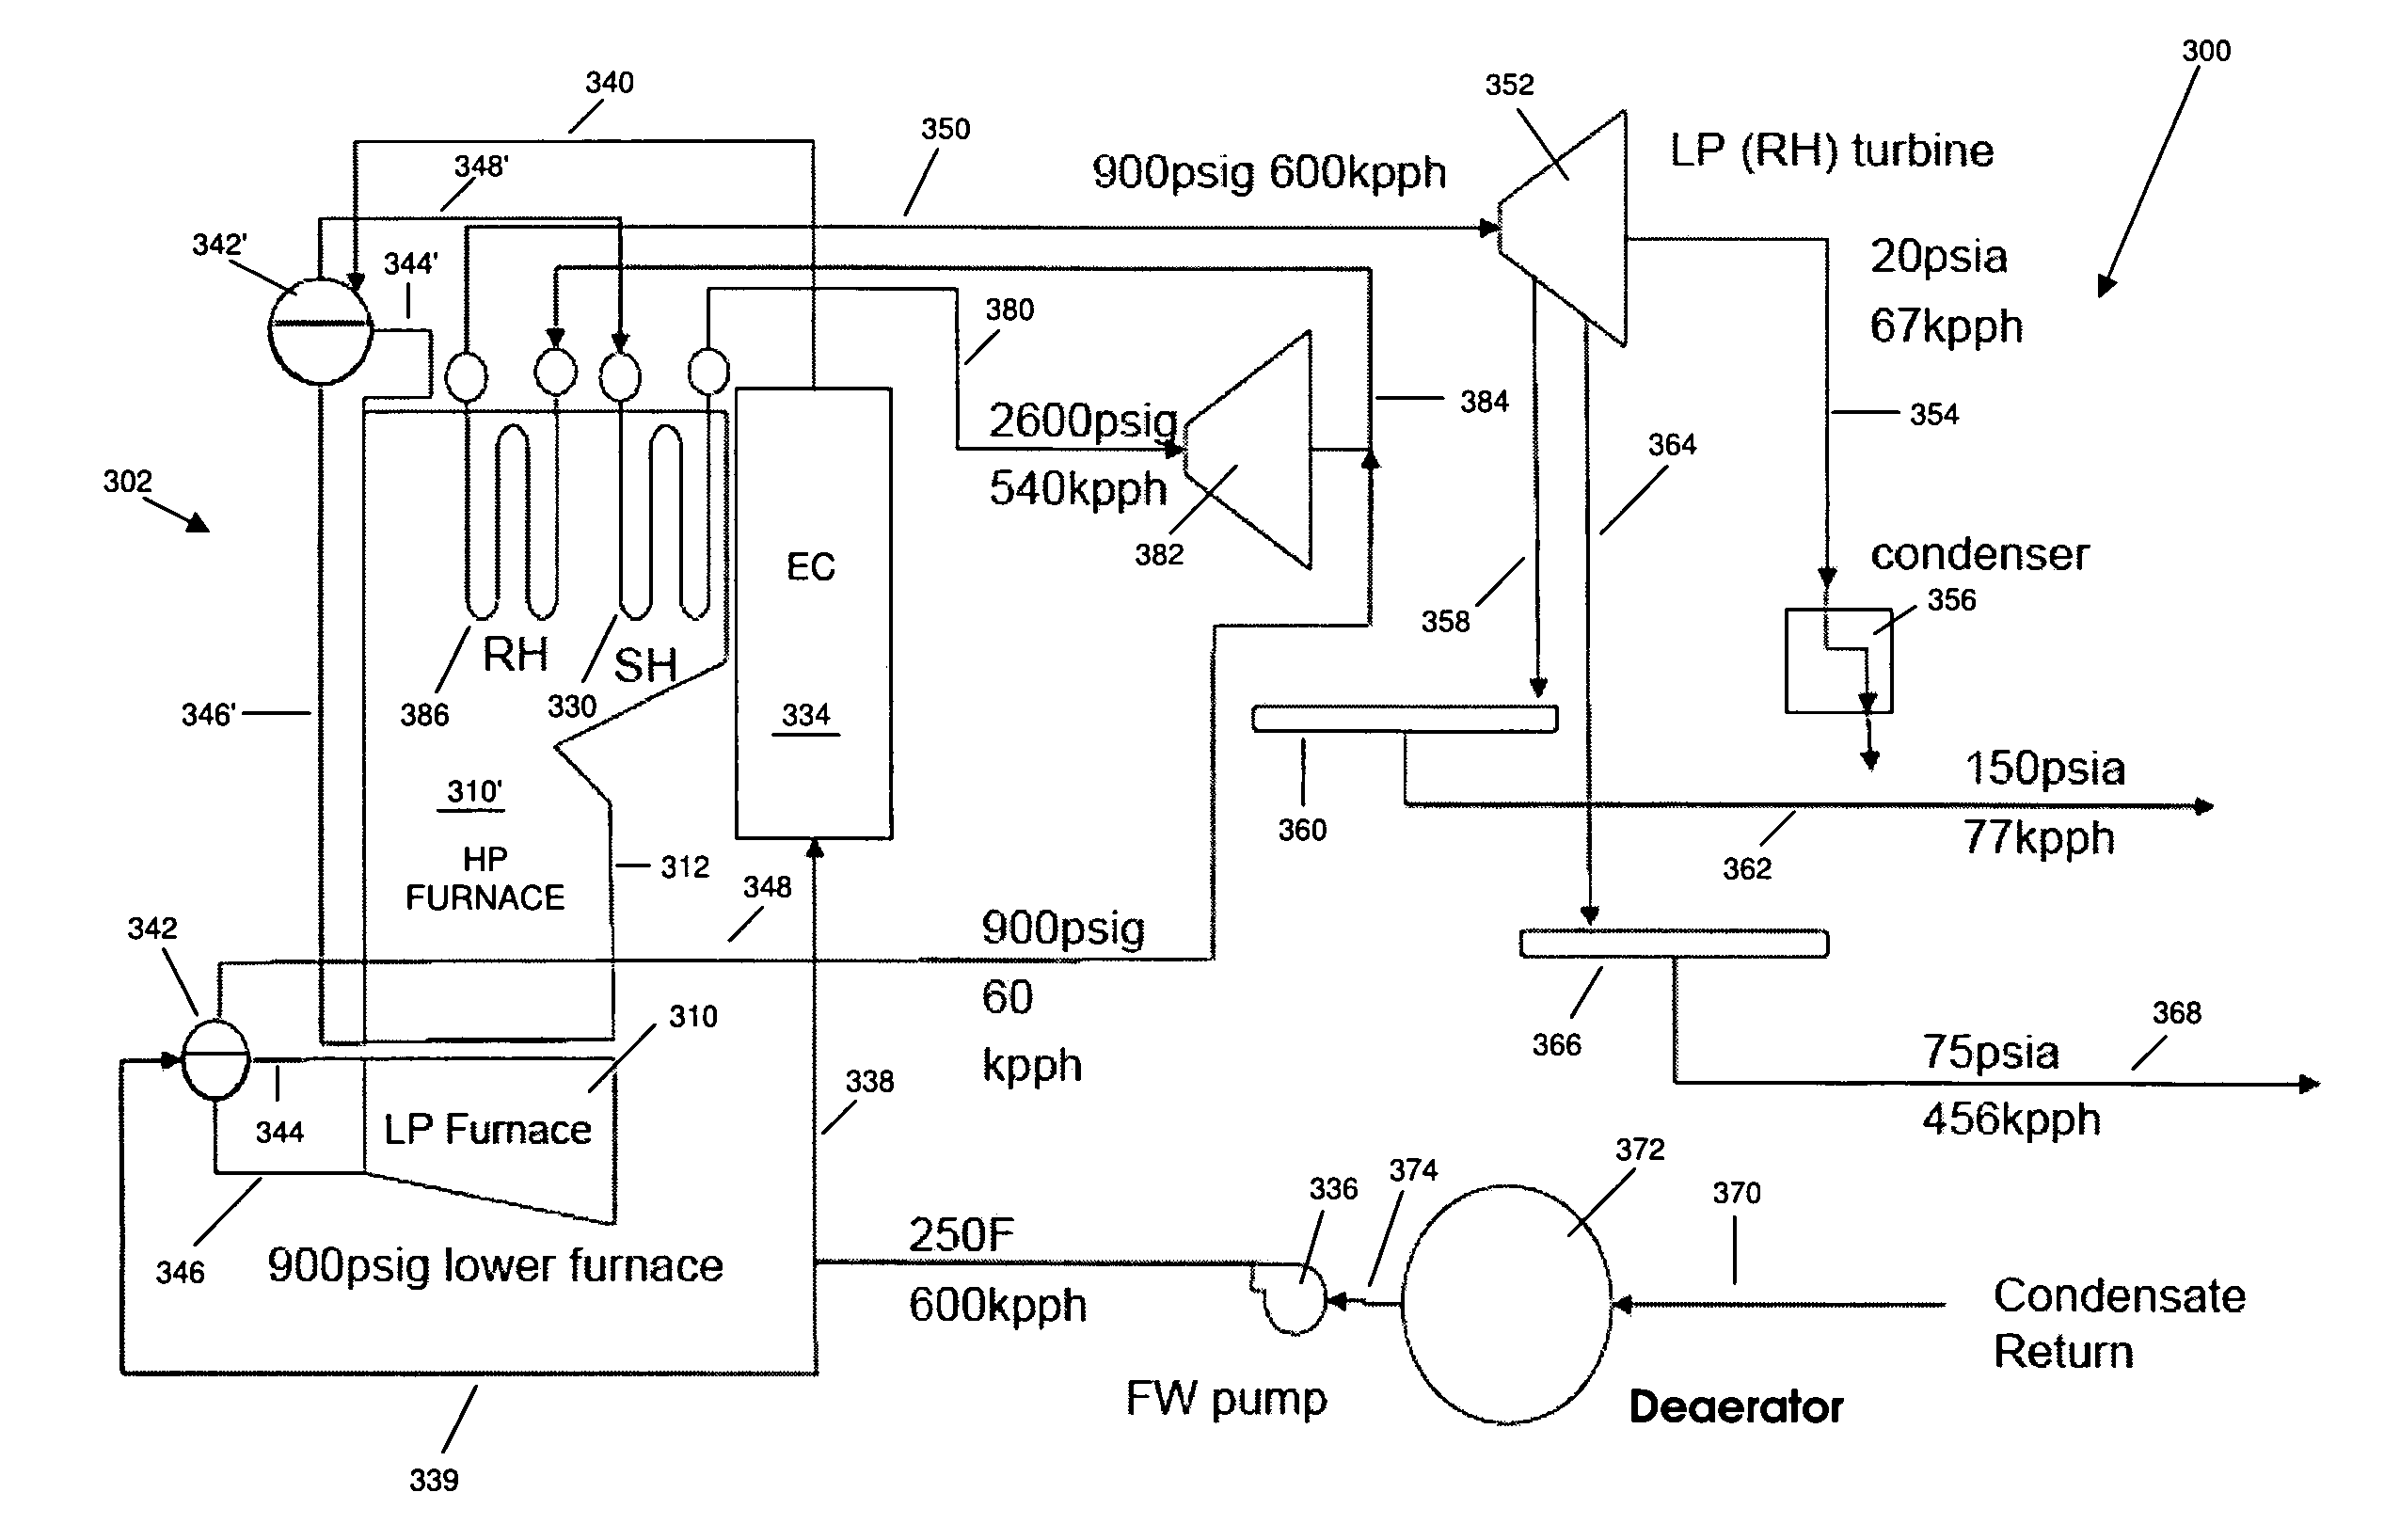 Enhanced steam cycle utilizing a dual pressure recovery boiler with reheat